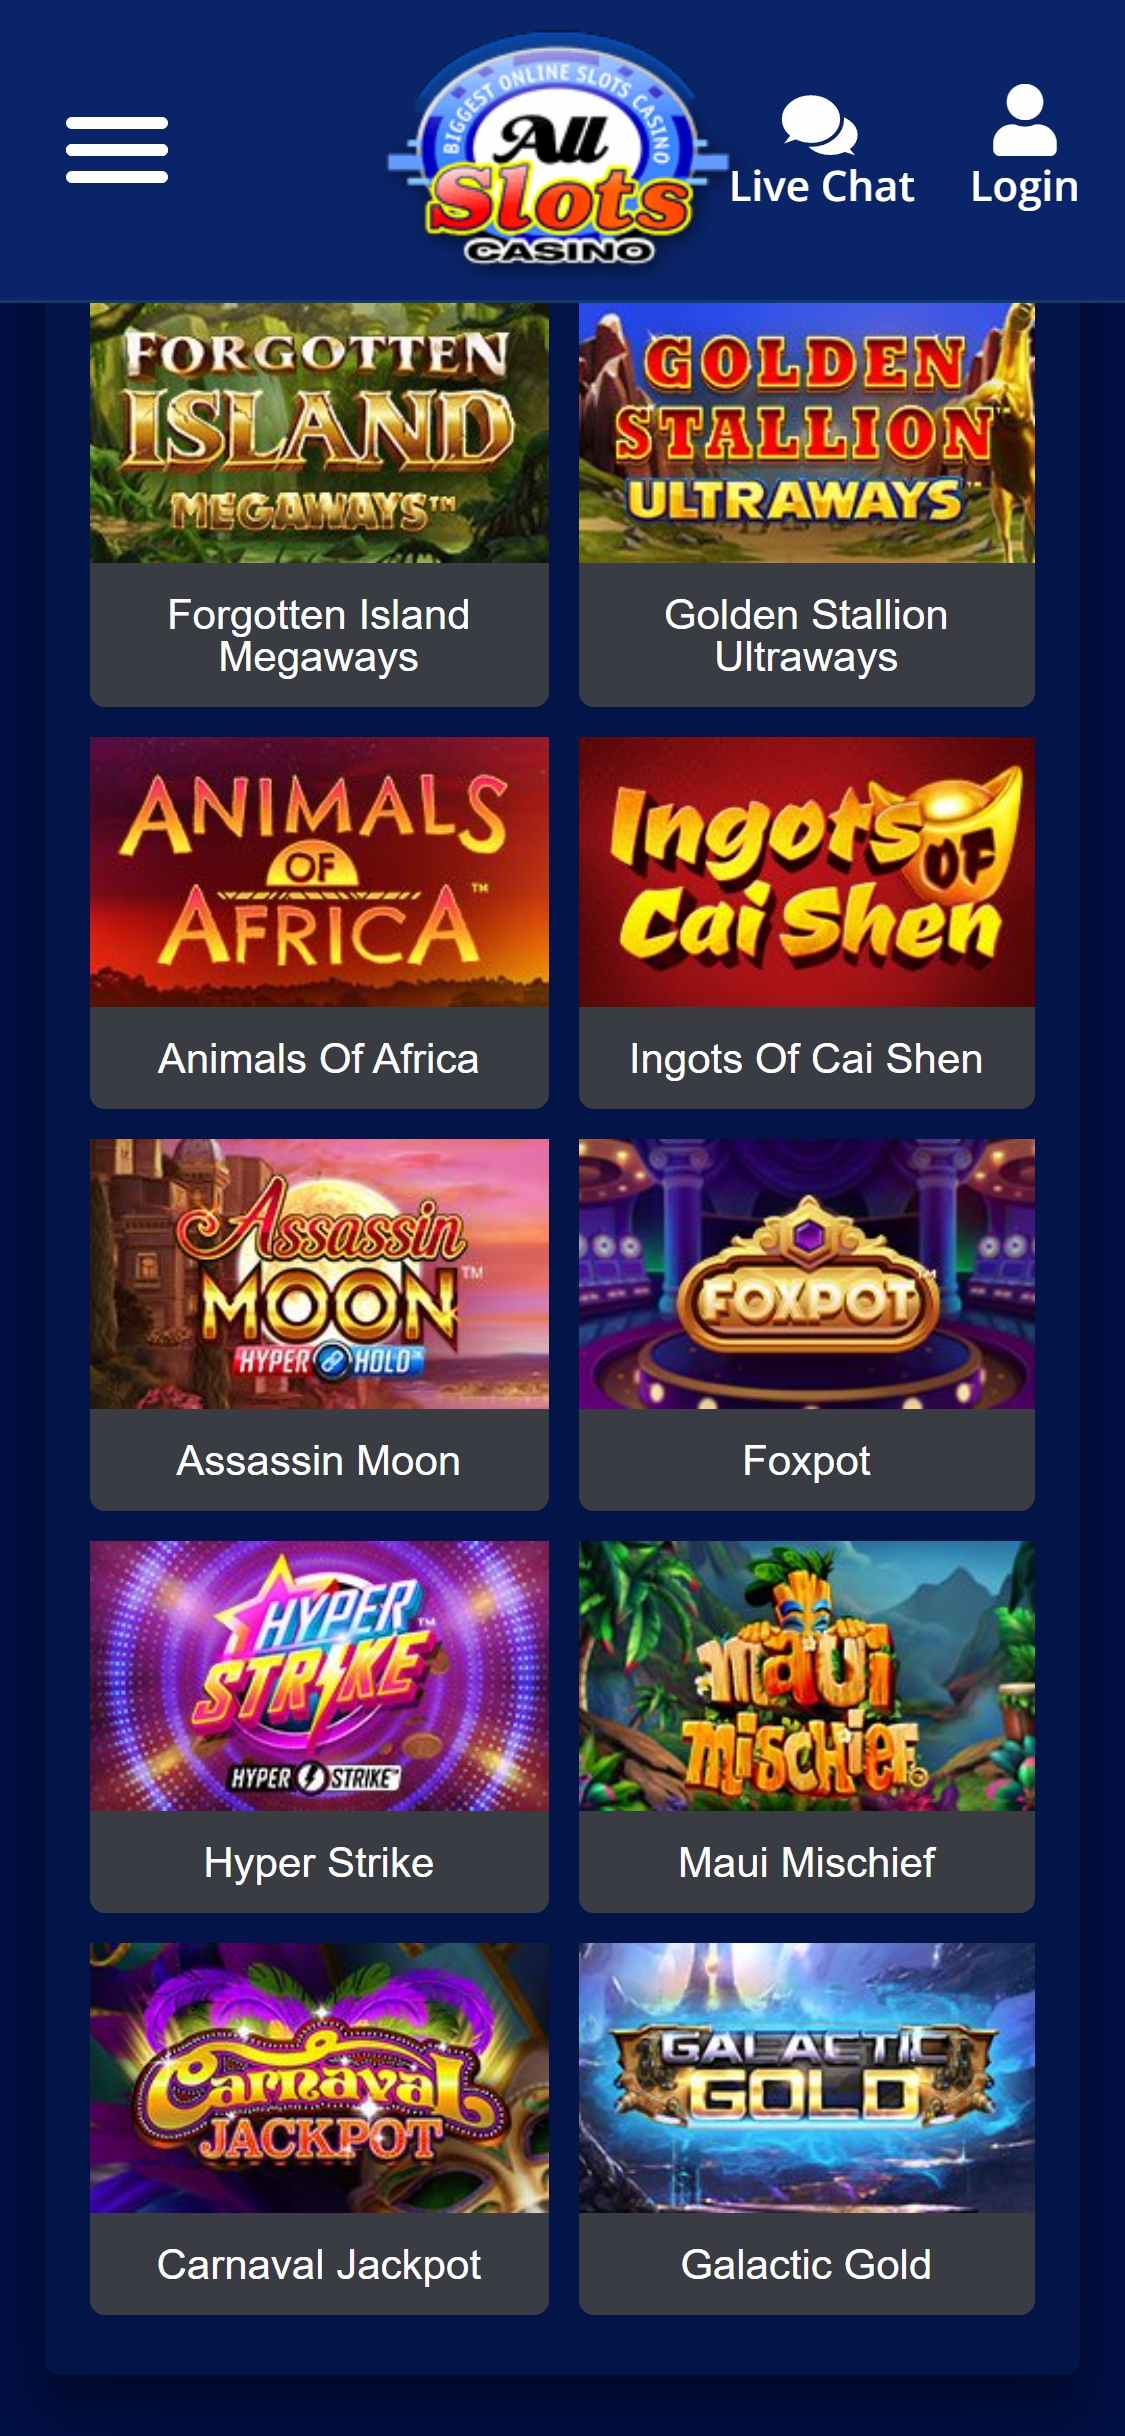 All Slots Casino Mobile Games Review